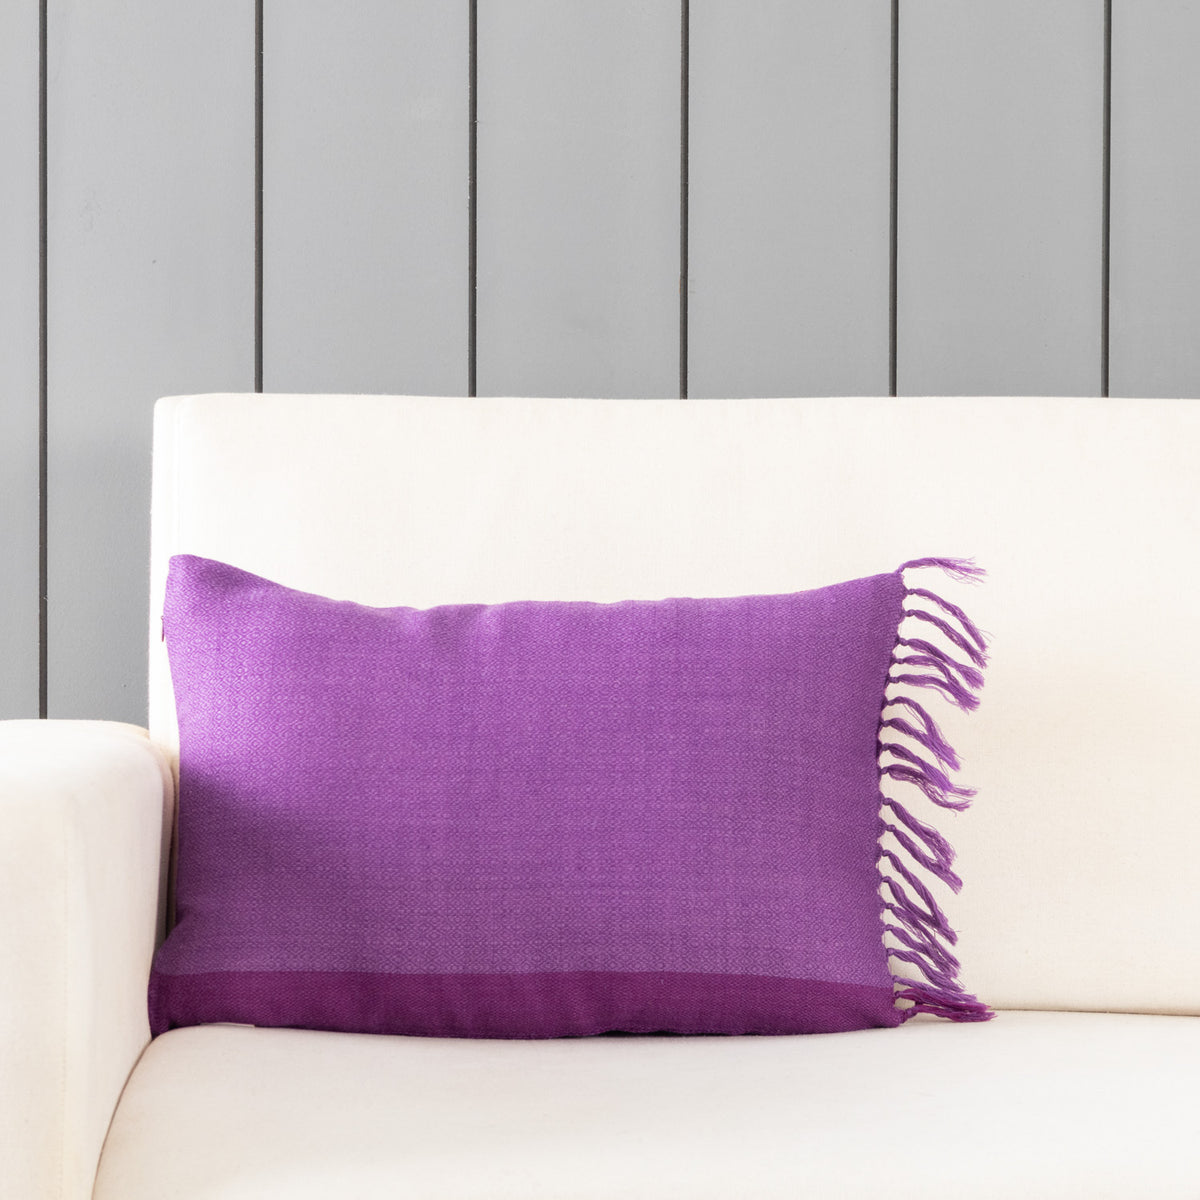 Handwoven Upcycled Purple Wool Cushion Cover - 12x18